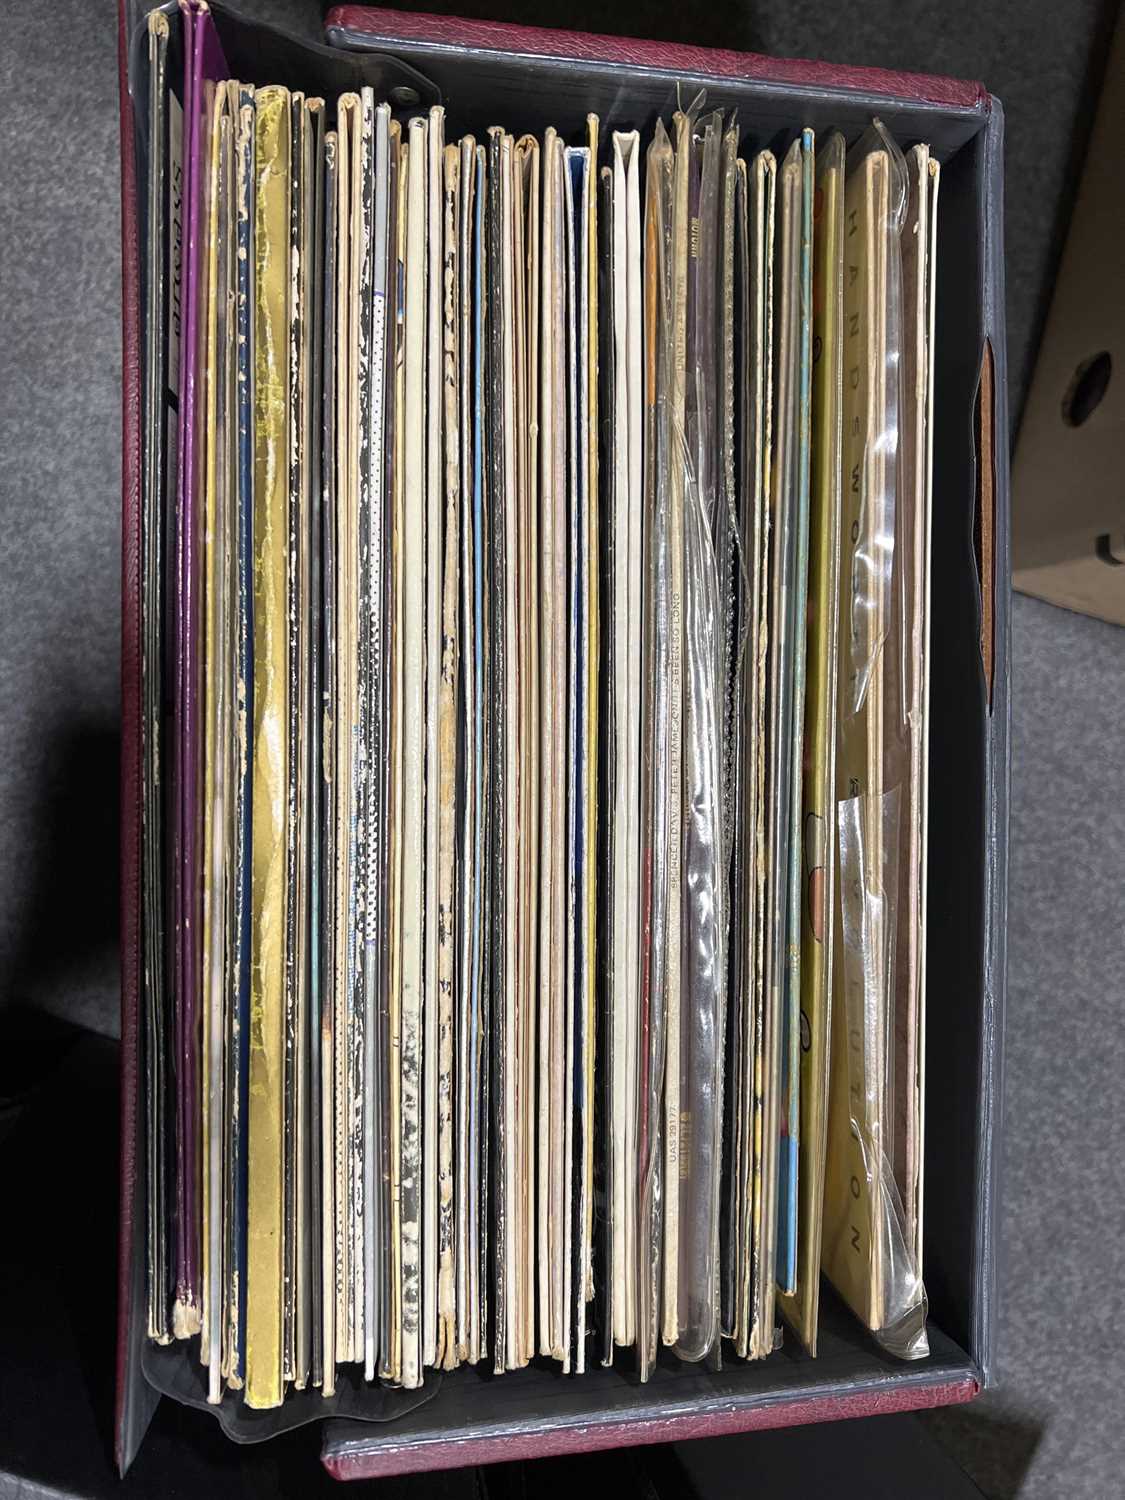 Three cases of Vinyl LP records, including Lynard Skynard, Eric Clapton, Rush and others - Image 5 of 5